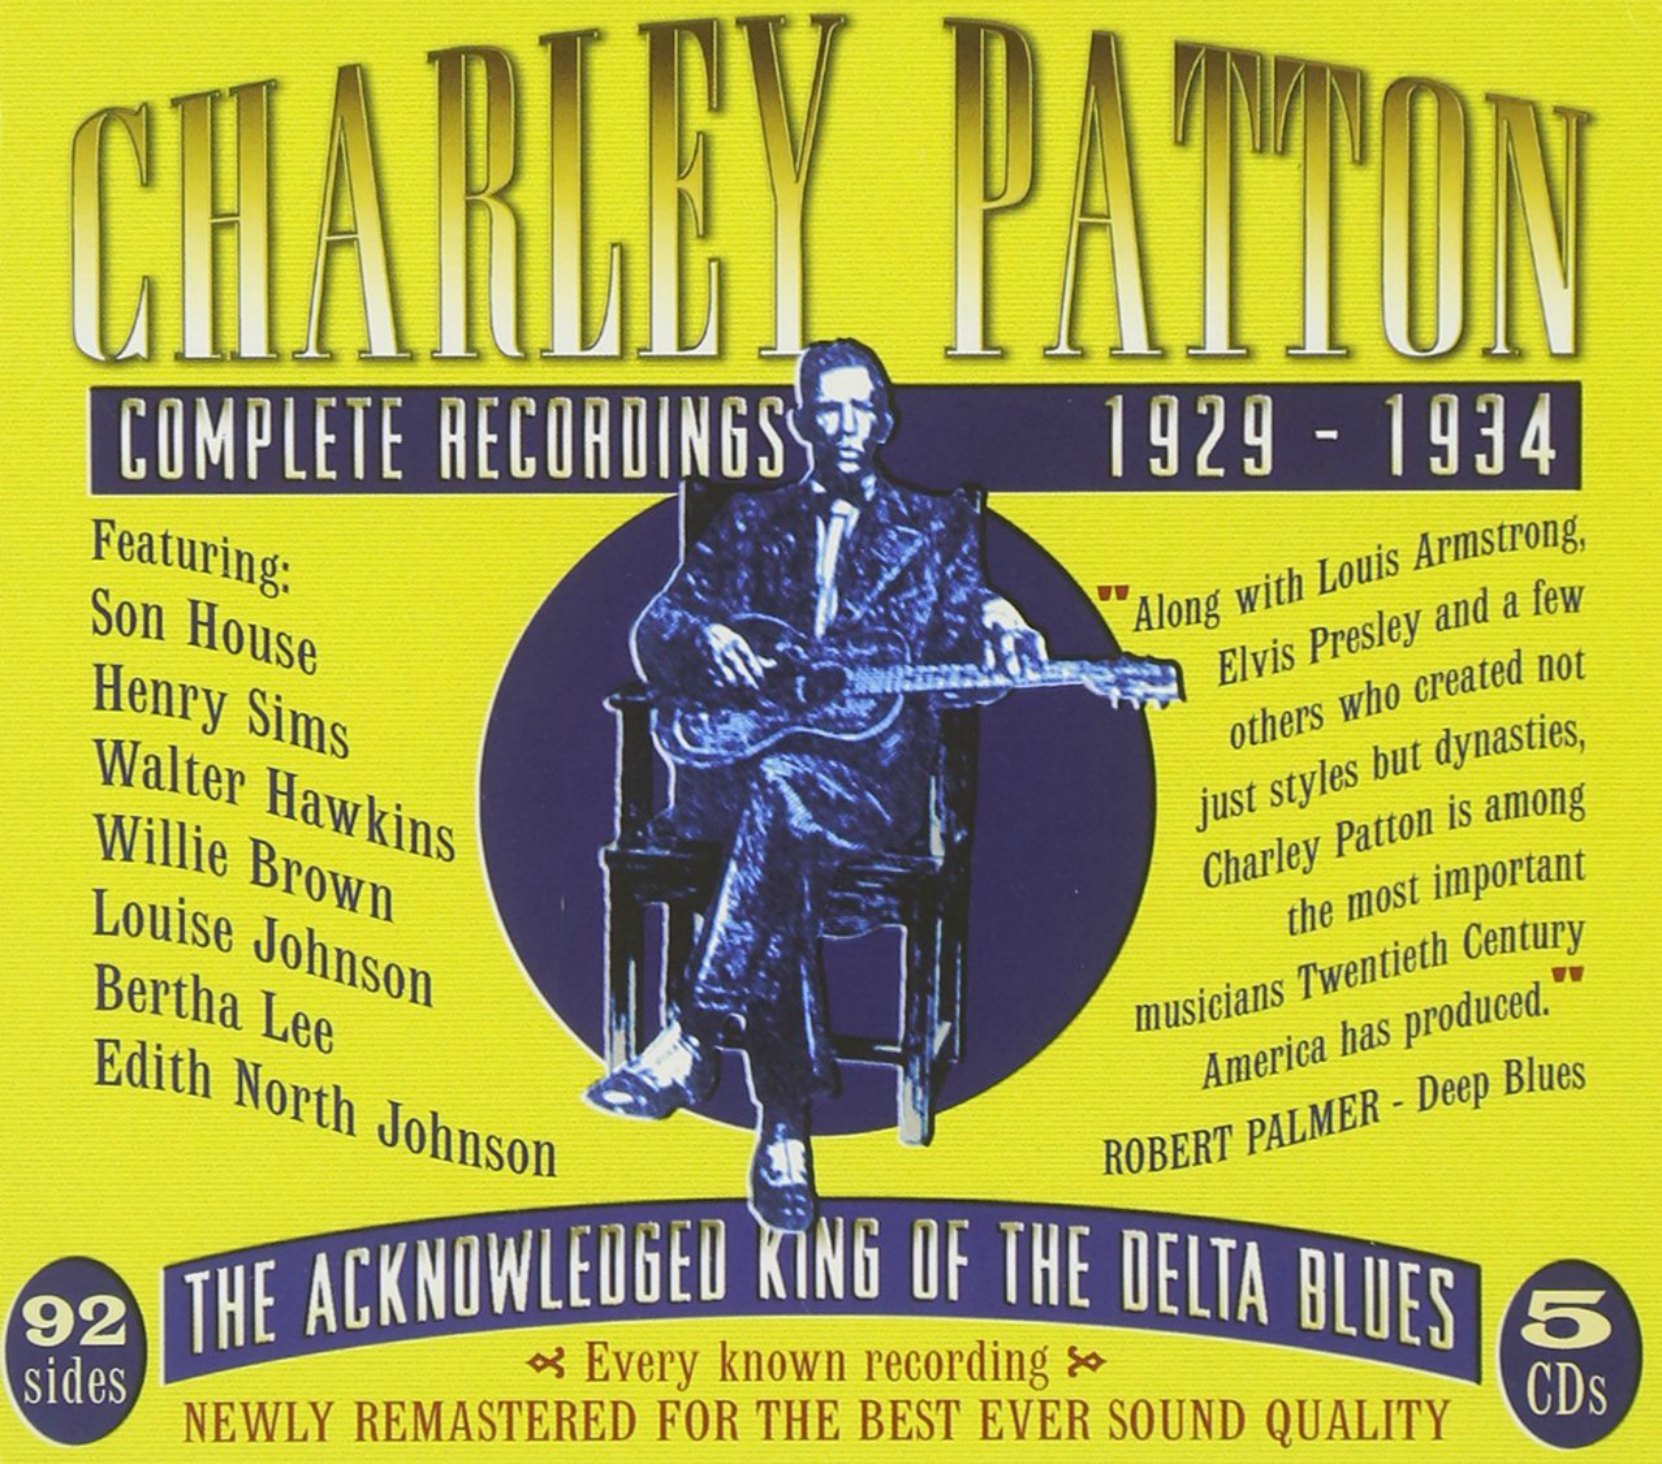 CD cover, Charley Patton Complete Recordings 1929-1934, a 5 CD box set on JSP Records